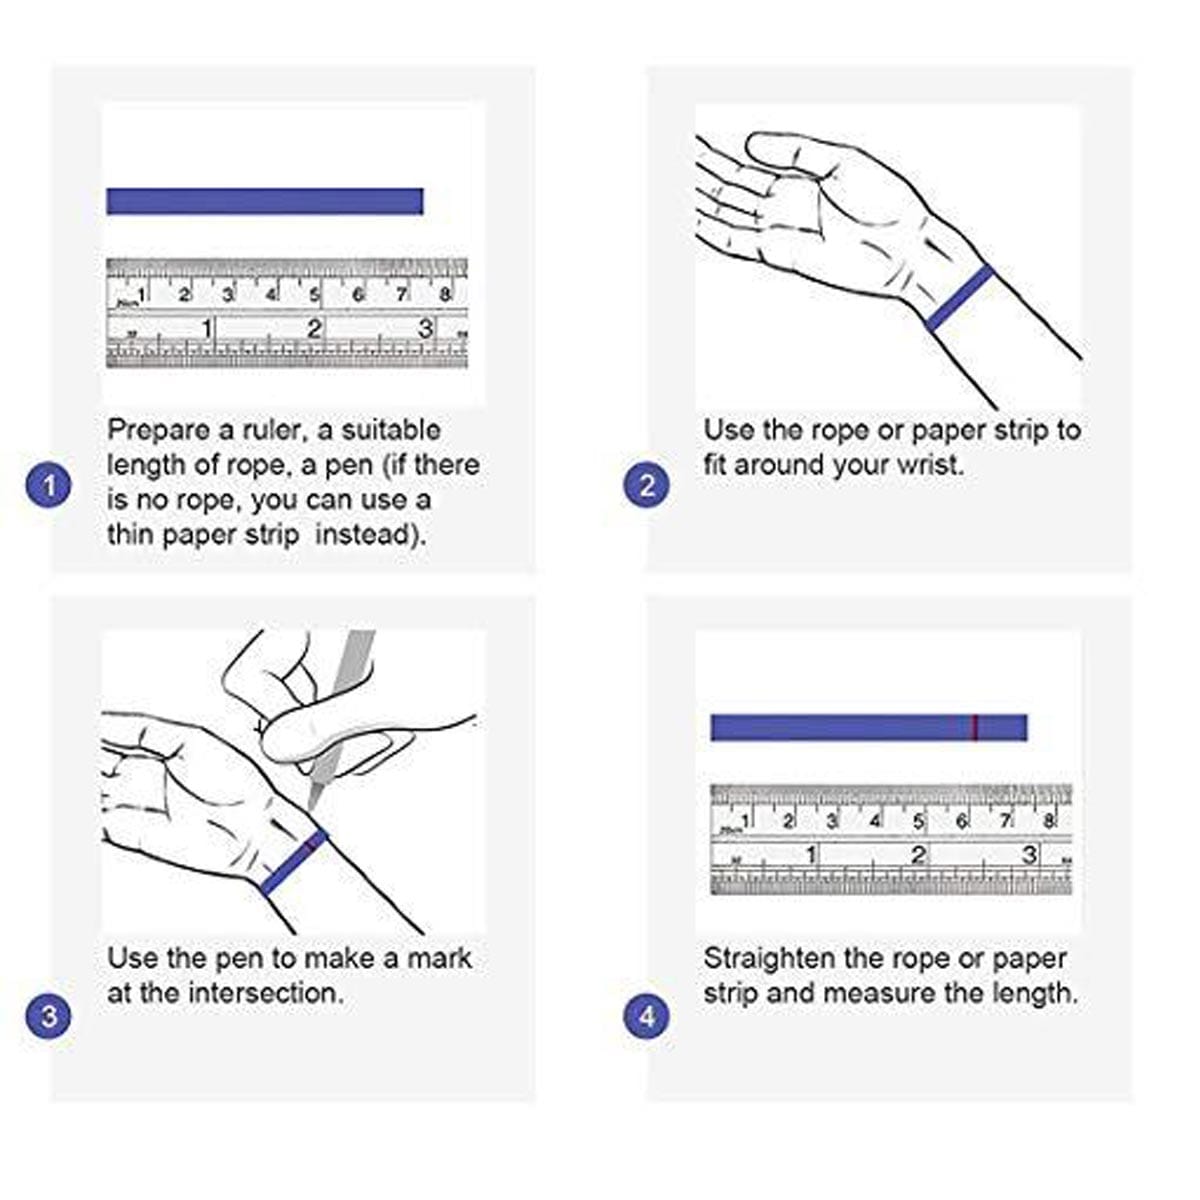 How to size your wrist